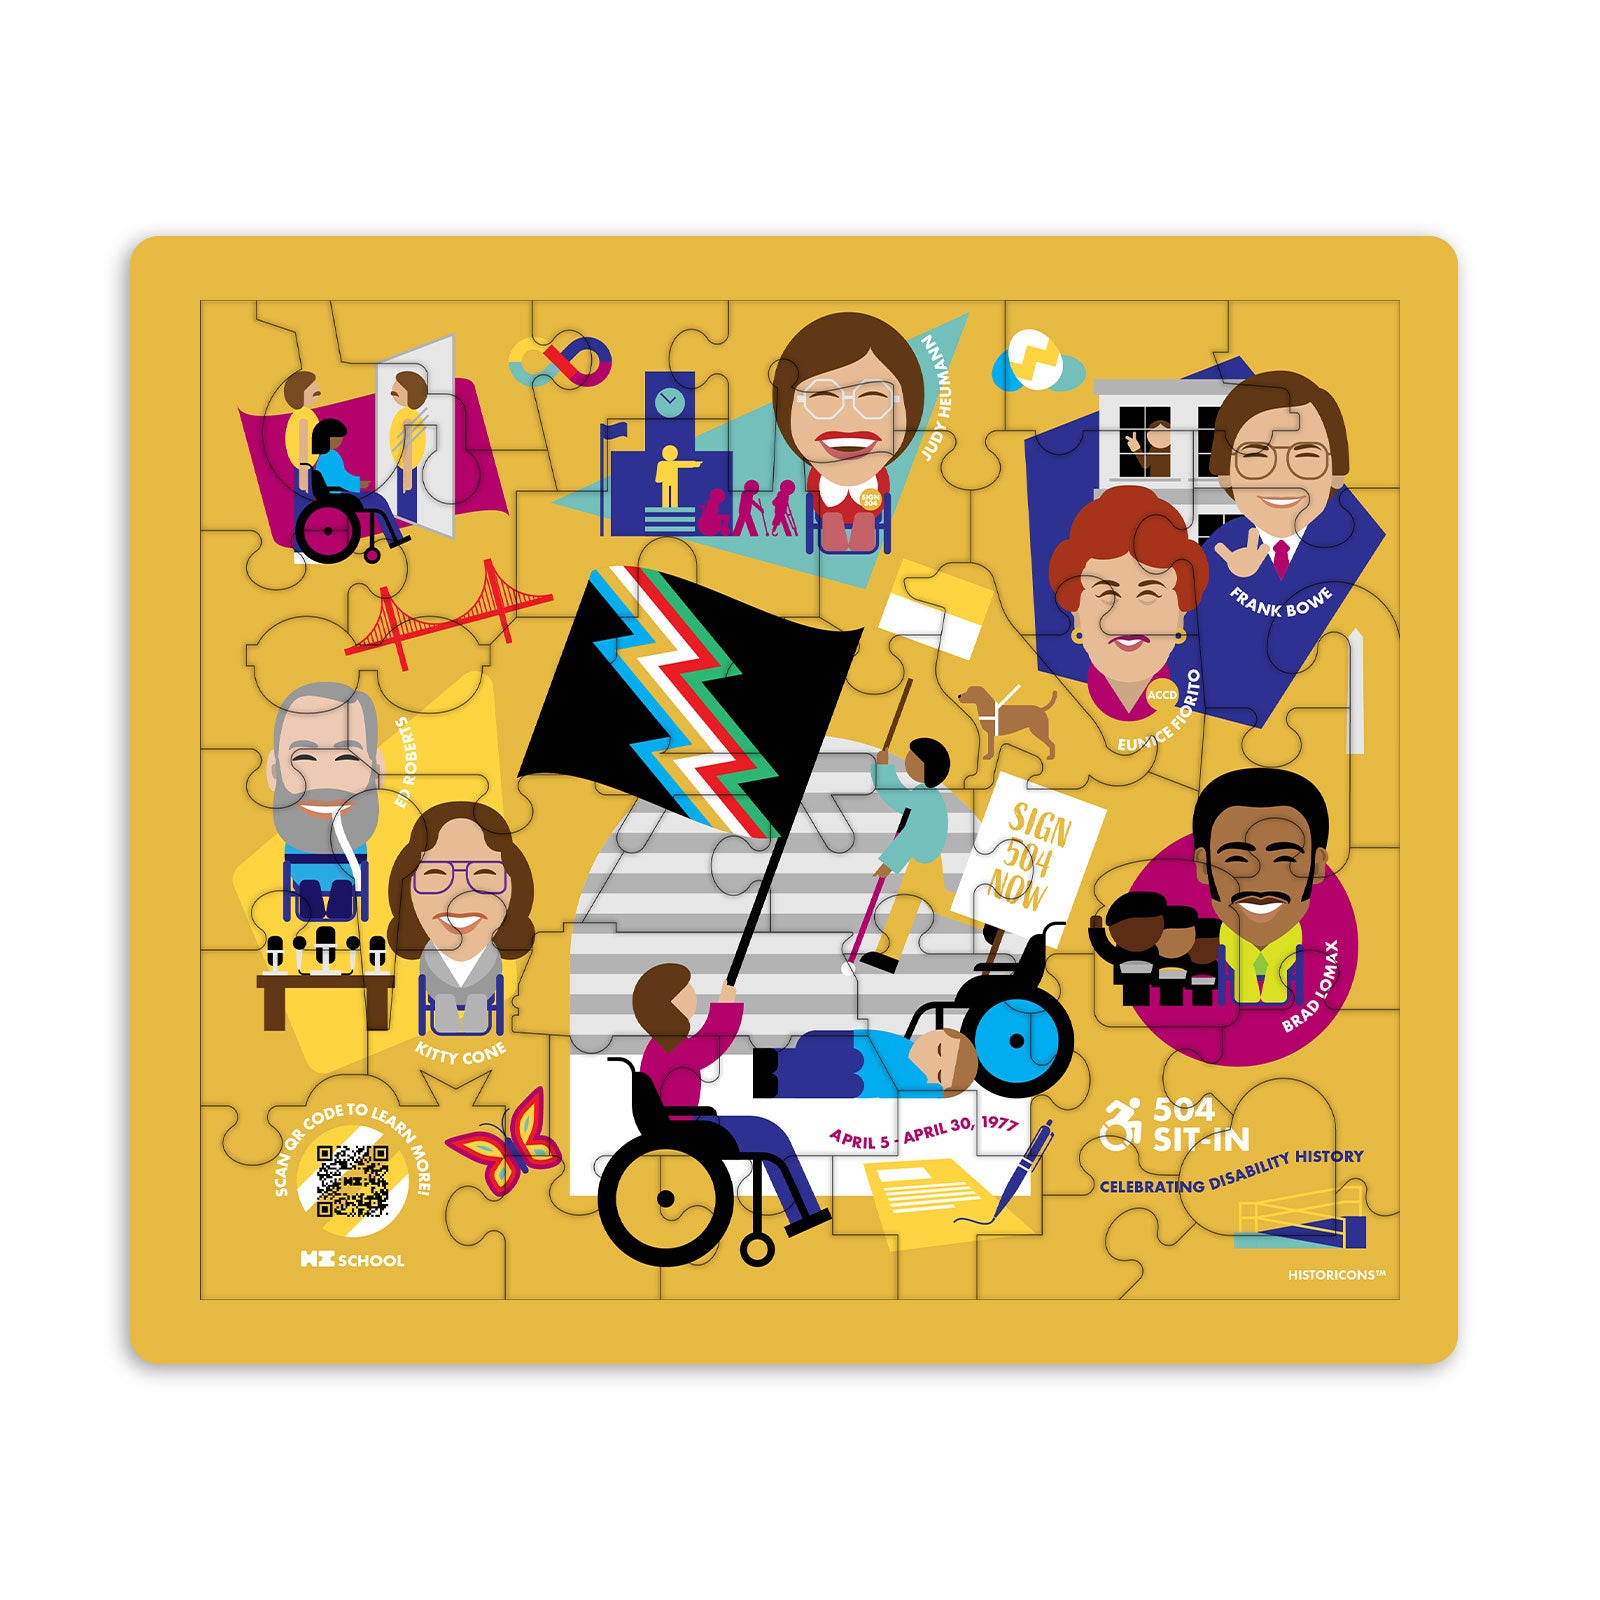 Celebrate Disability History with the the Historicons 504 Sit-In children's jigsaw puzzle, pictured here. The puzzle is yellow and features original art with colorful vignettes and portraits of the 504 Sit-In and historic icons who made it happen: including Judy Heumman, Frank Bowe, Eunice Fiorito, Brad Lomax, Ed Roberts, and Kitty Cone. Custom puzzle piece shapes, including puzzle pieces shaped like a dog, eyeglasses, wheelchair, slice of bread, and more serve as storytelling guides and discussion prompts.